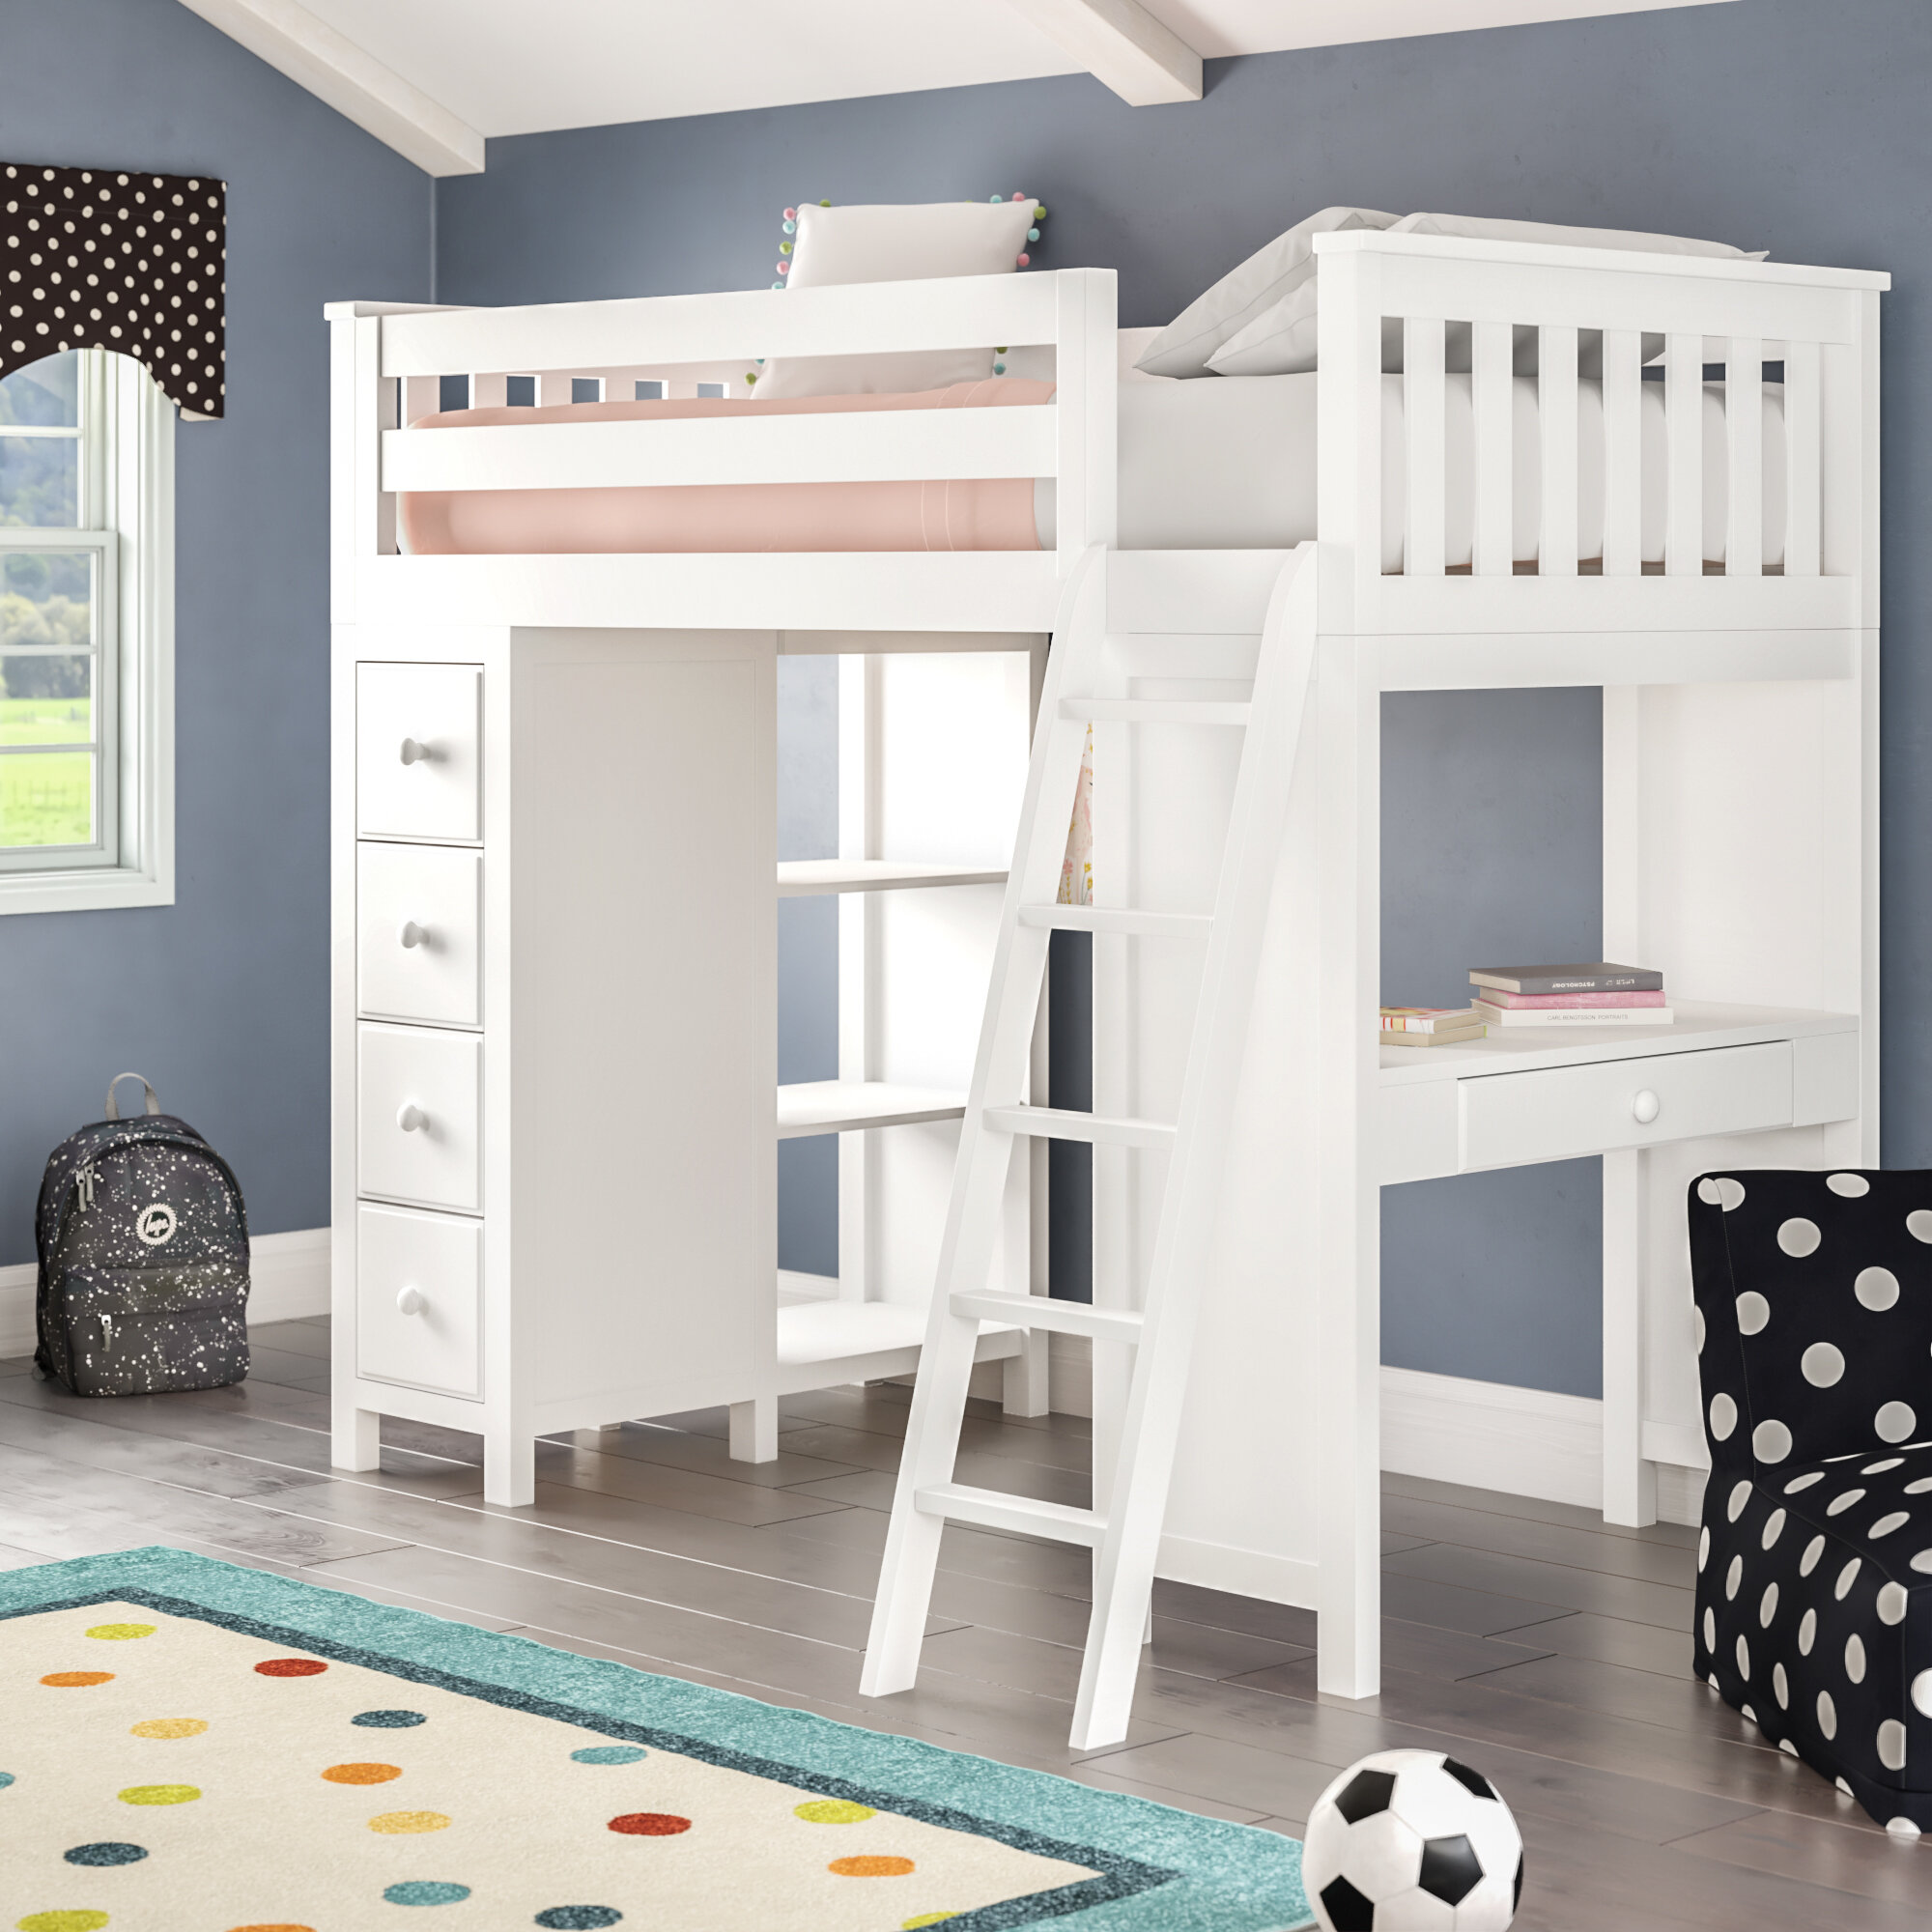 childrens high beds